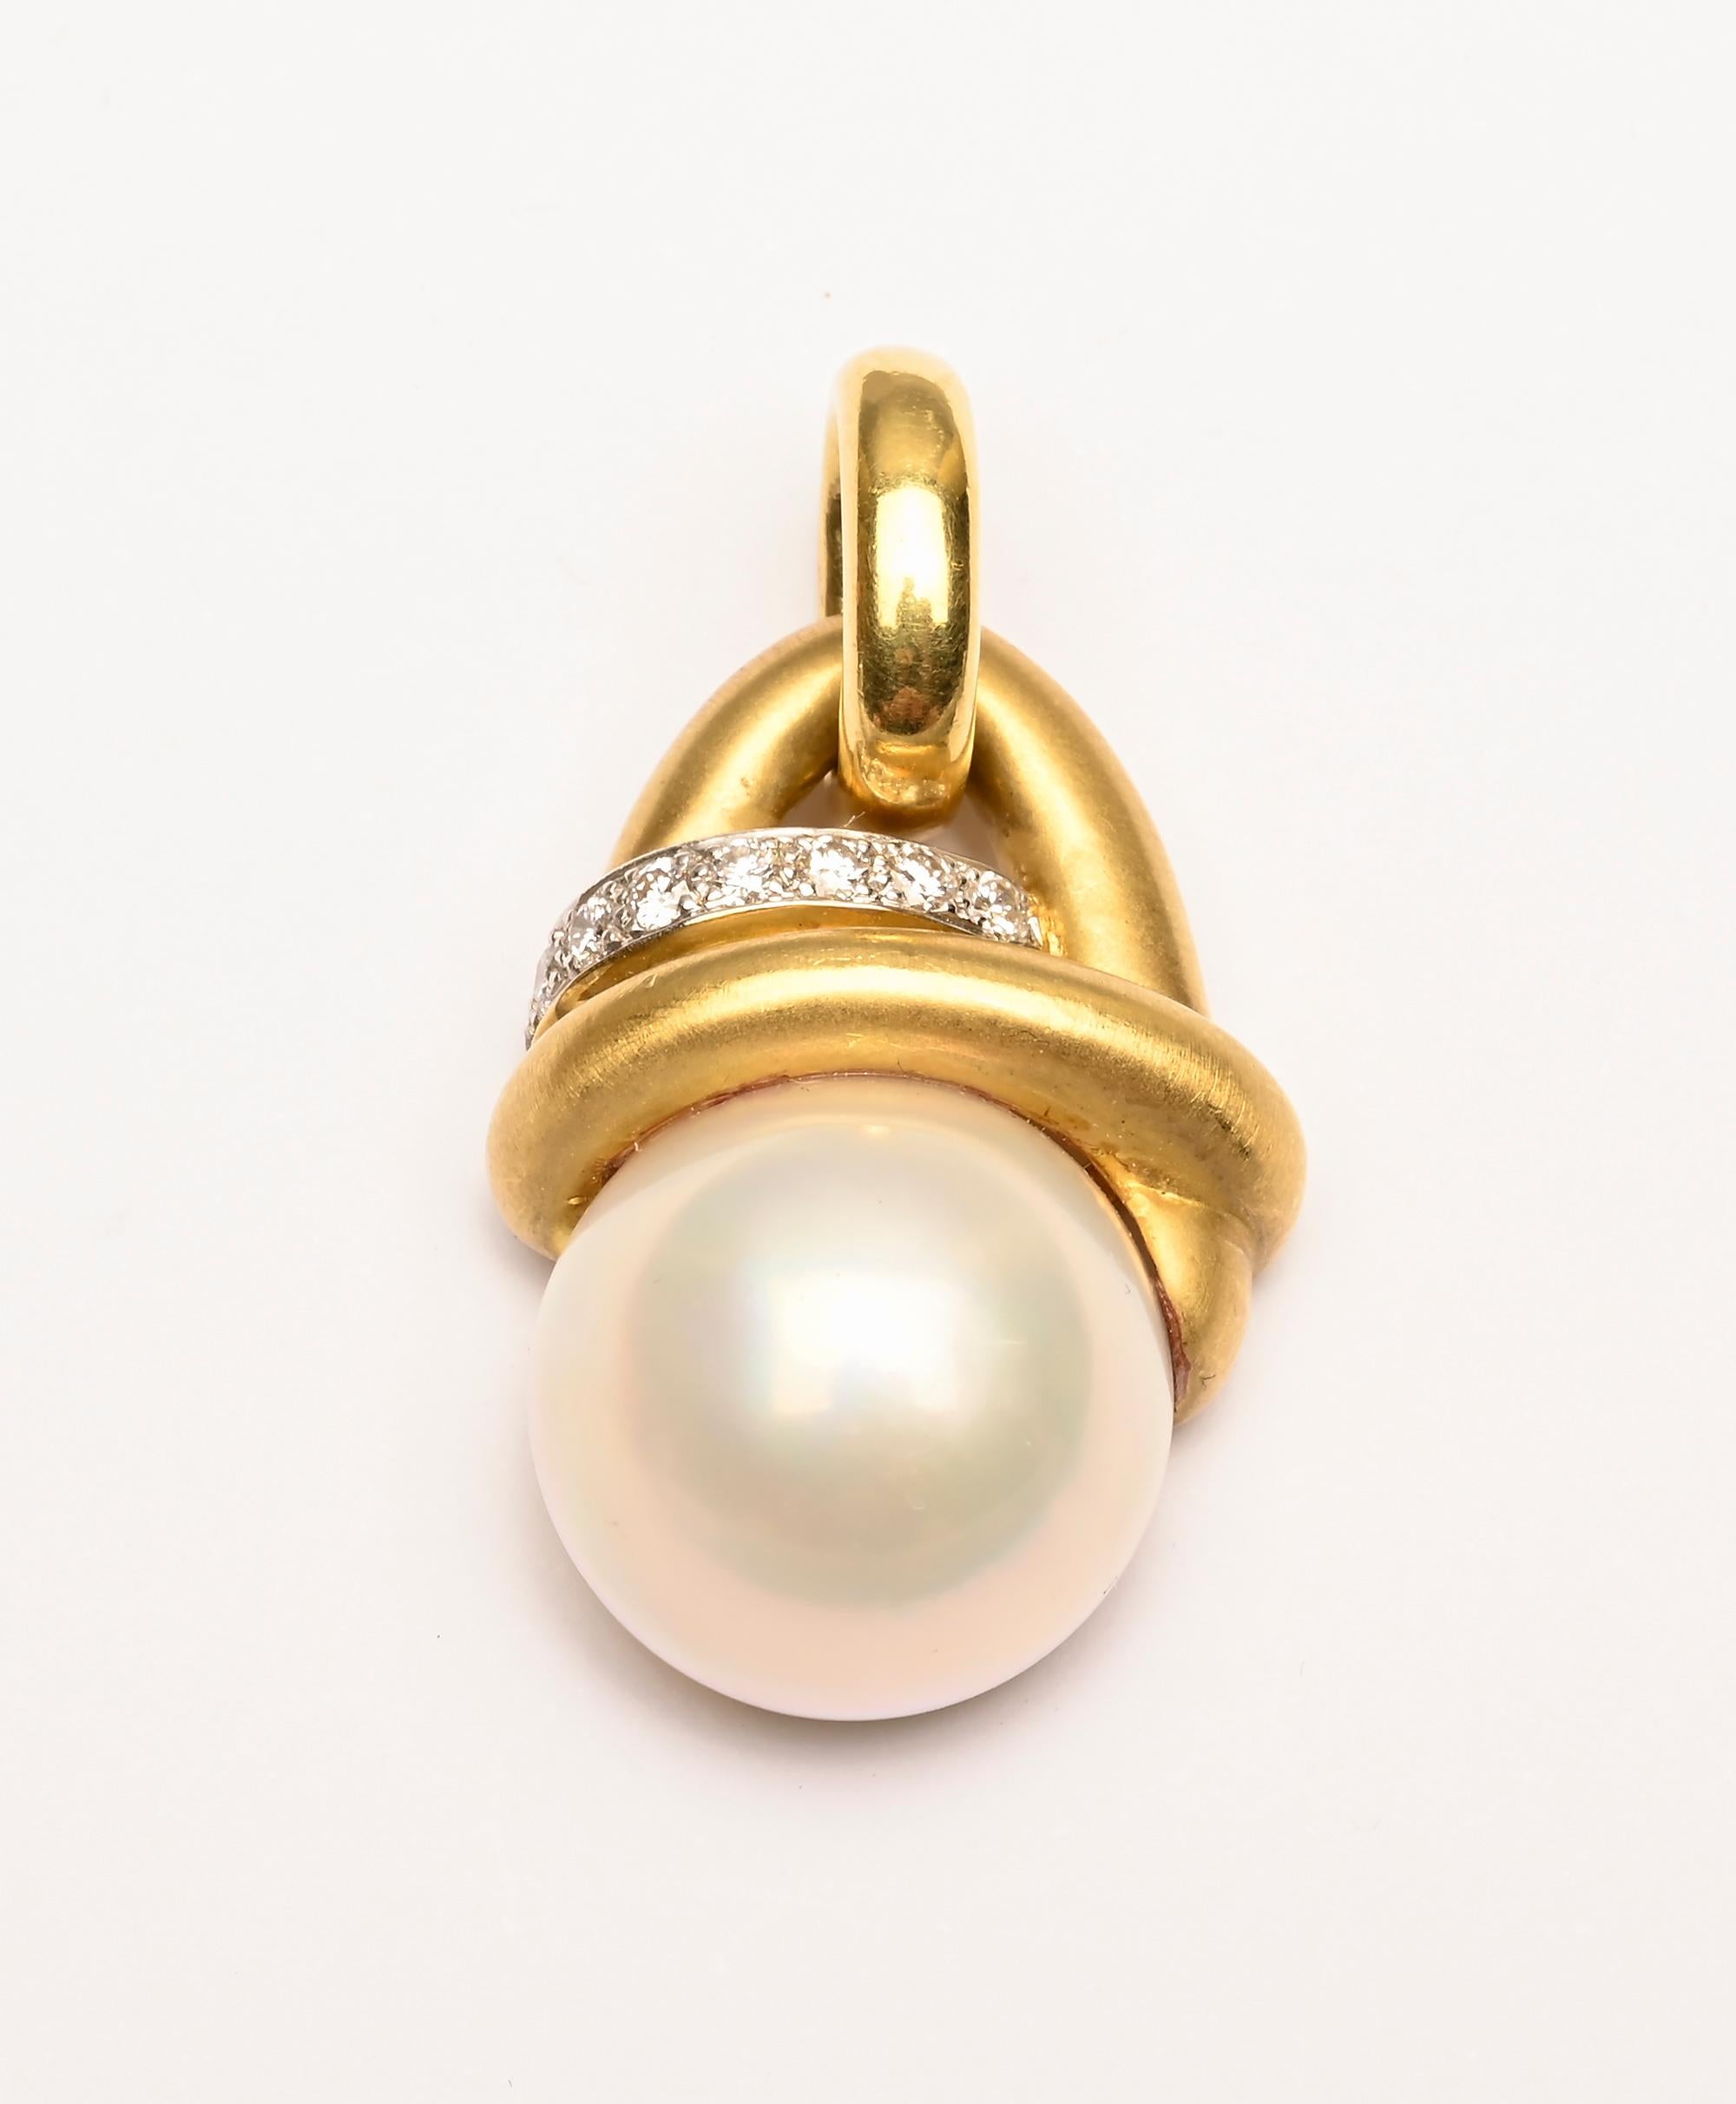 Marlene Stowe pearl pendant with 7 diamonds weighing approximately .3 karats. The half pearl measures 7/8